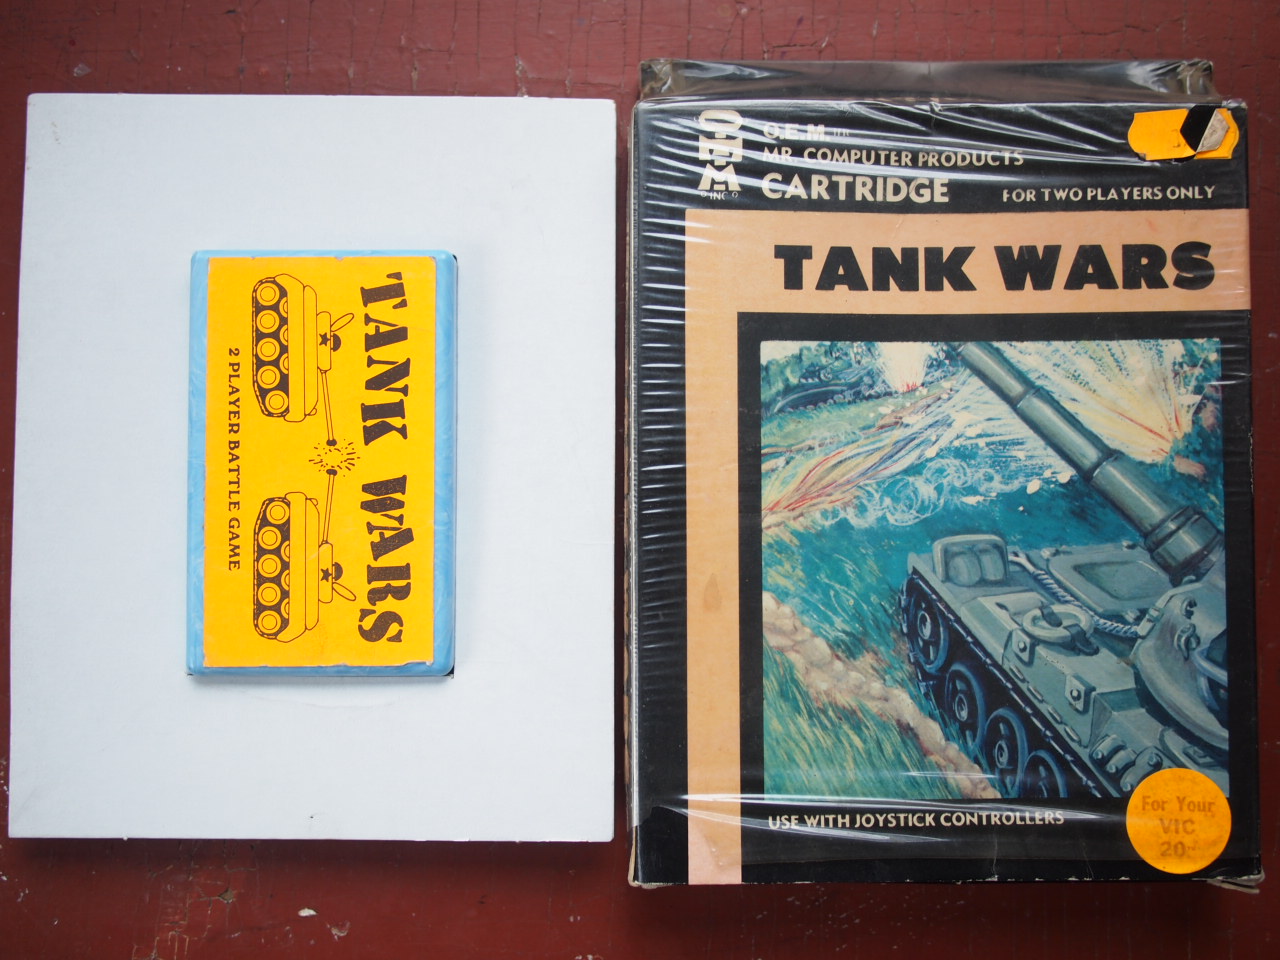 Tank Wars OEM/Mr.Computer Products (complete in box) nice blue